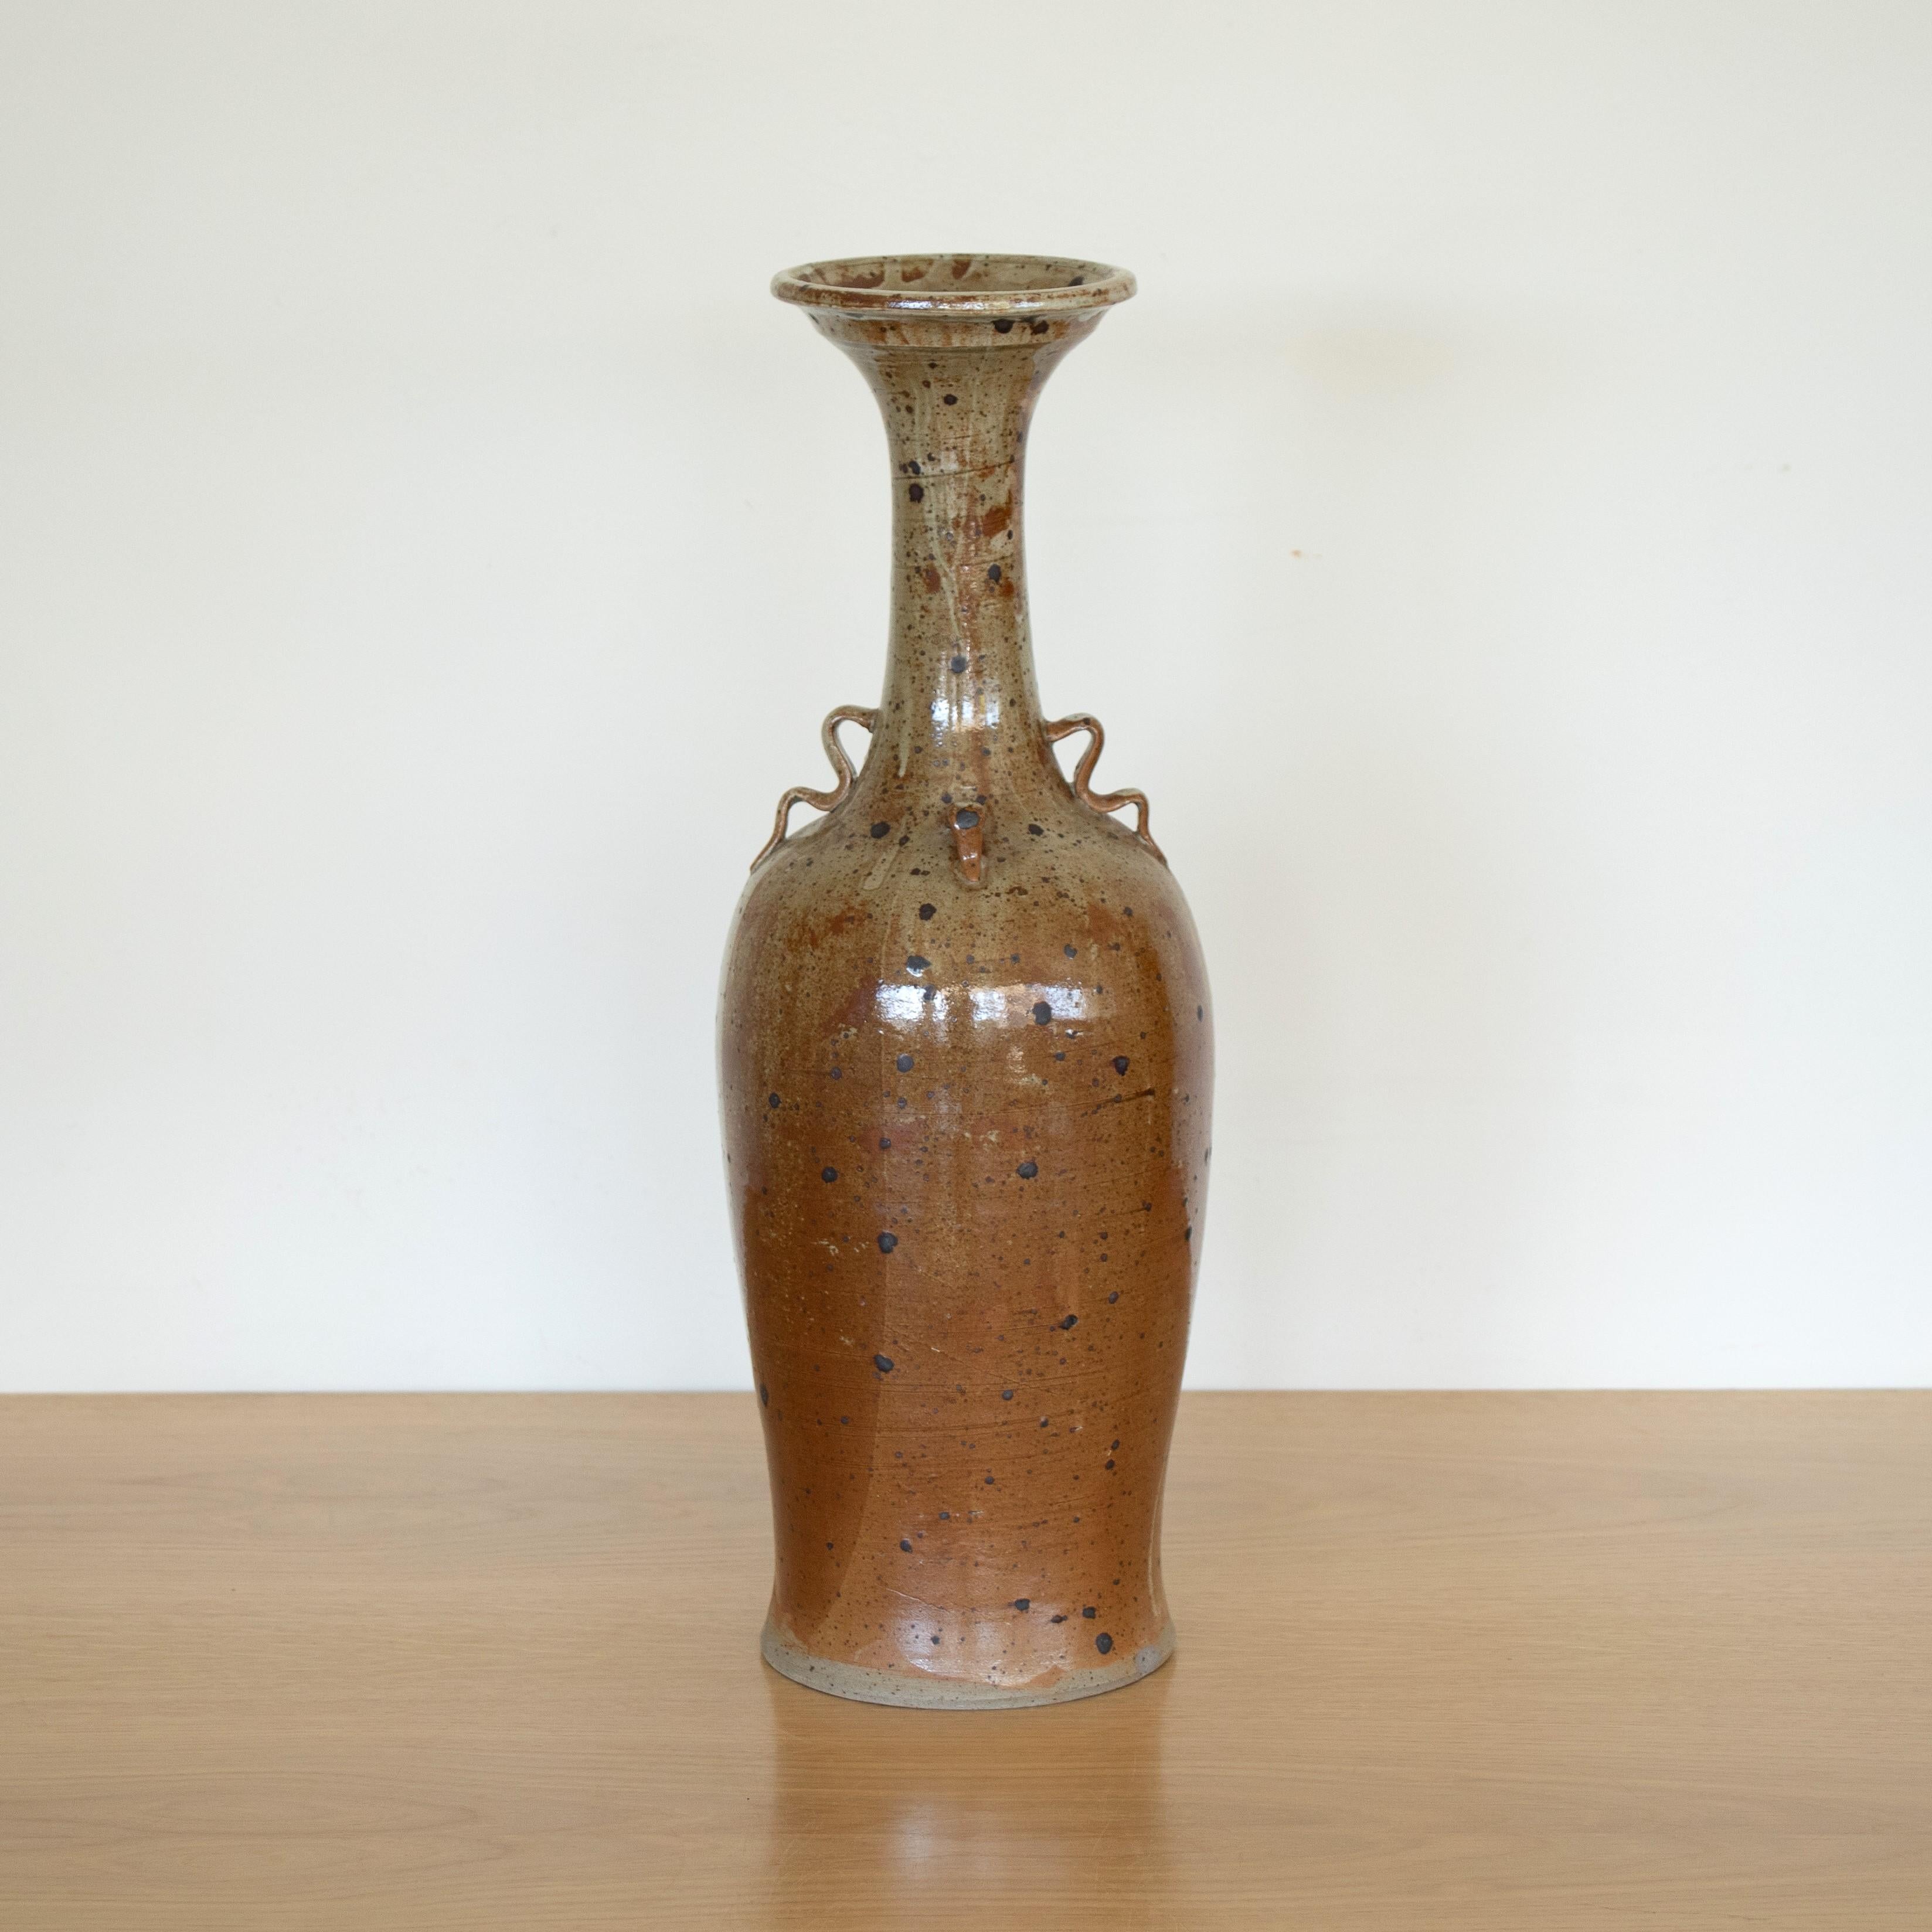 Beautiful tall ceramic vase from France. Natural tan glaze with brown specks and squiggle handle detail. Impressive vintage piece, perfect as a decorative object or vase. 